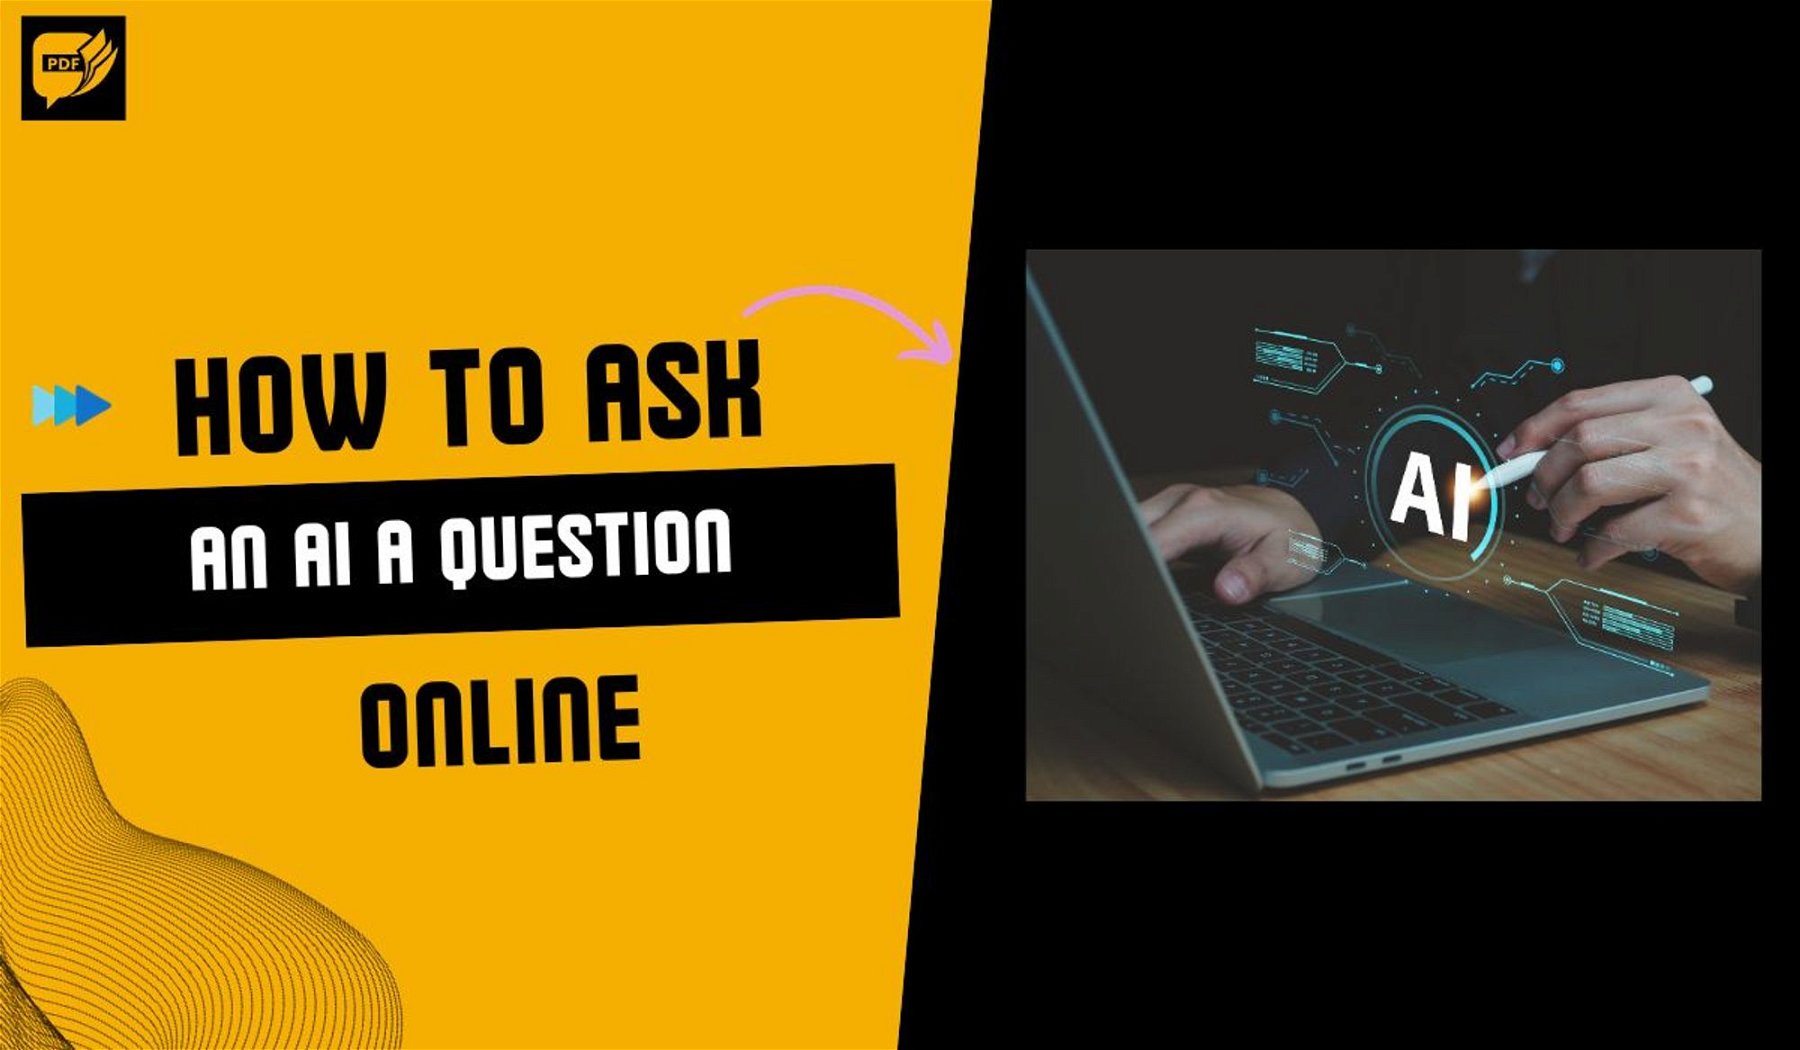 How to Ask an AI a Question Online